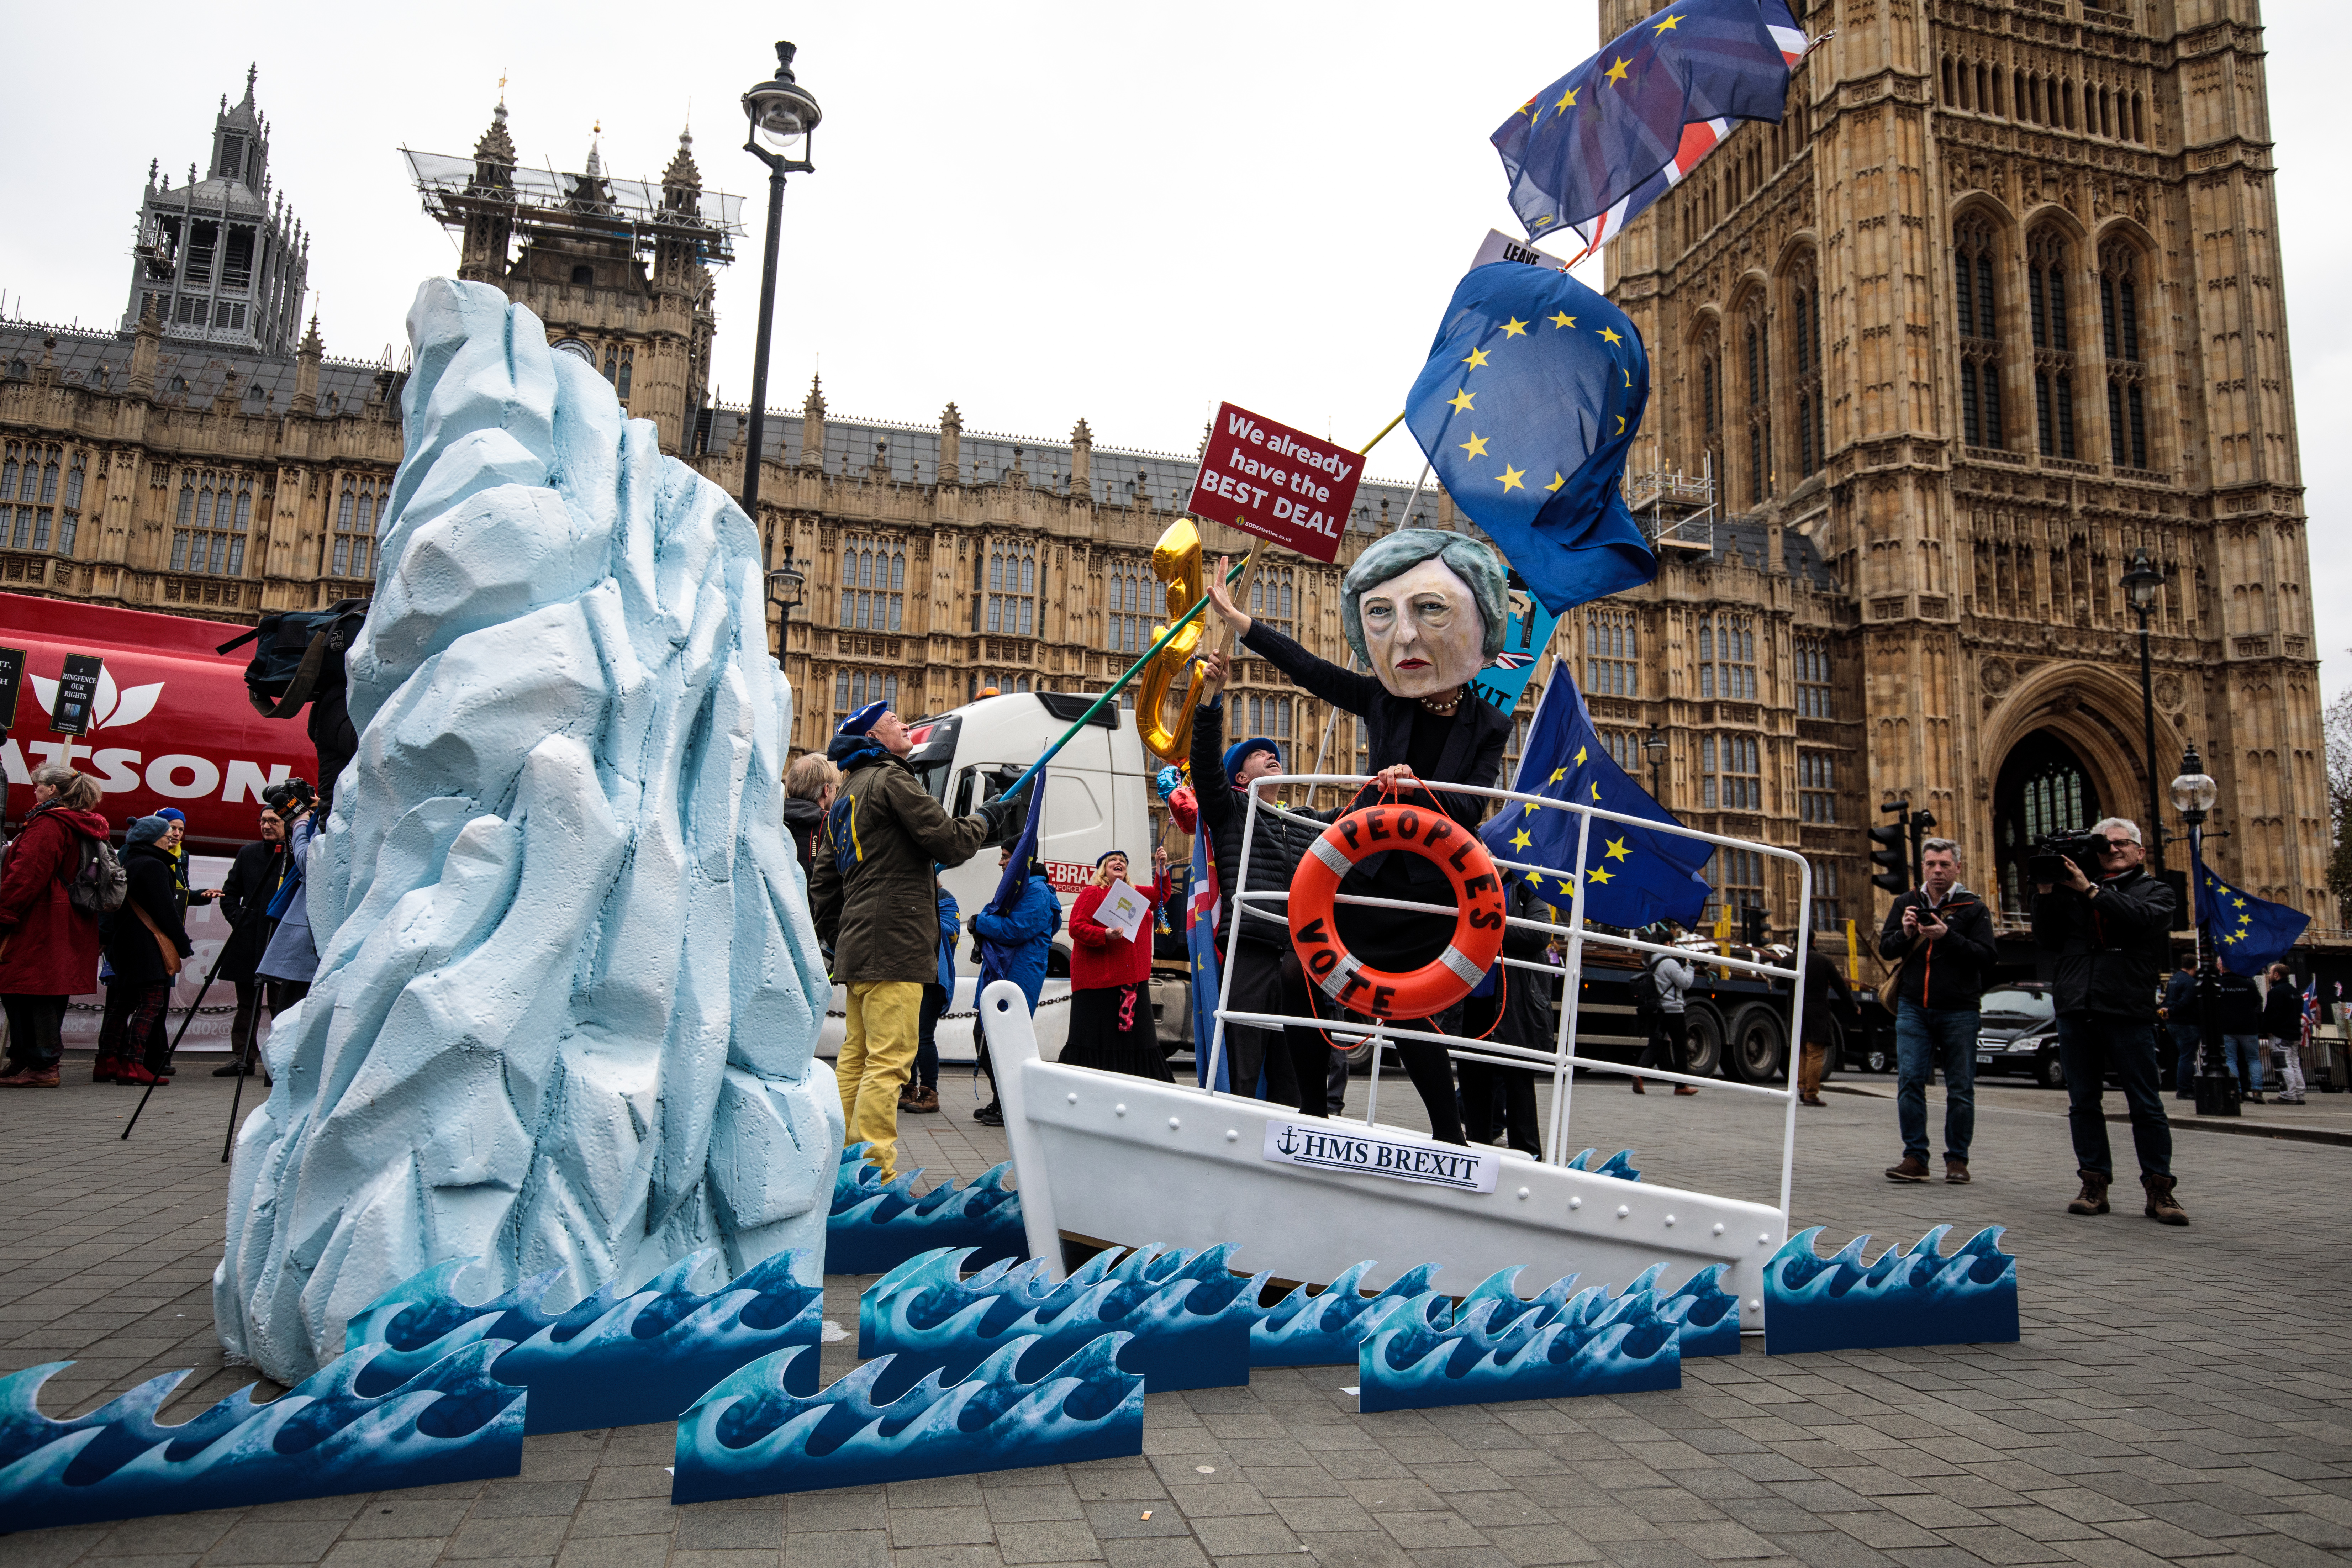 A demonstration featuring a paper mâché Theresa May head sailing towards an iceberg is staged by campaign group Avaaz outside the Houses of Parliament on January 15, 2019 in London, England. (Photo by Jack Taylor/Getty Images)